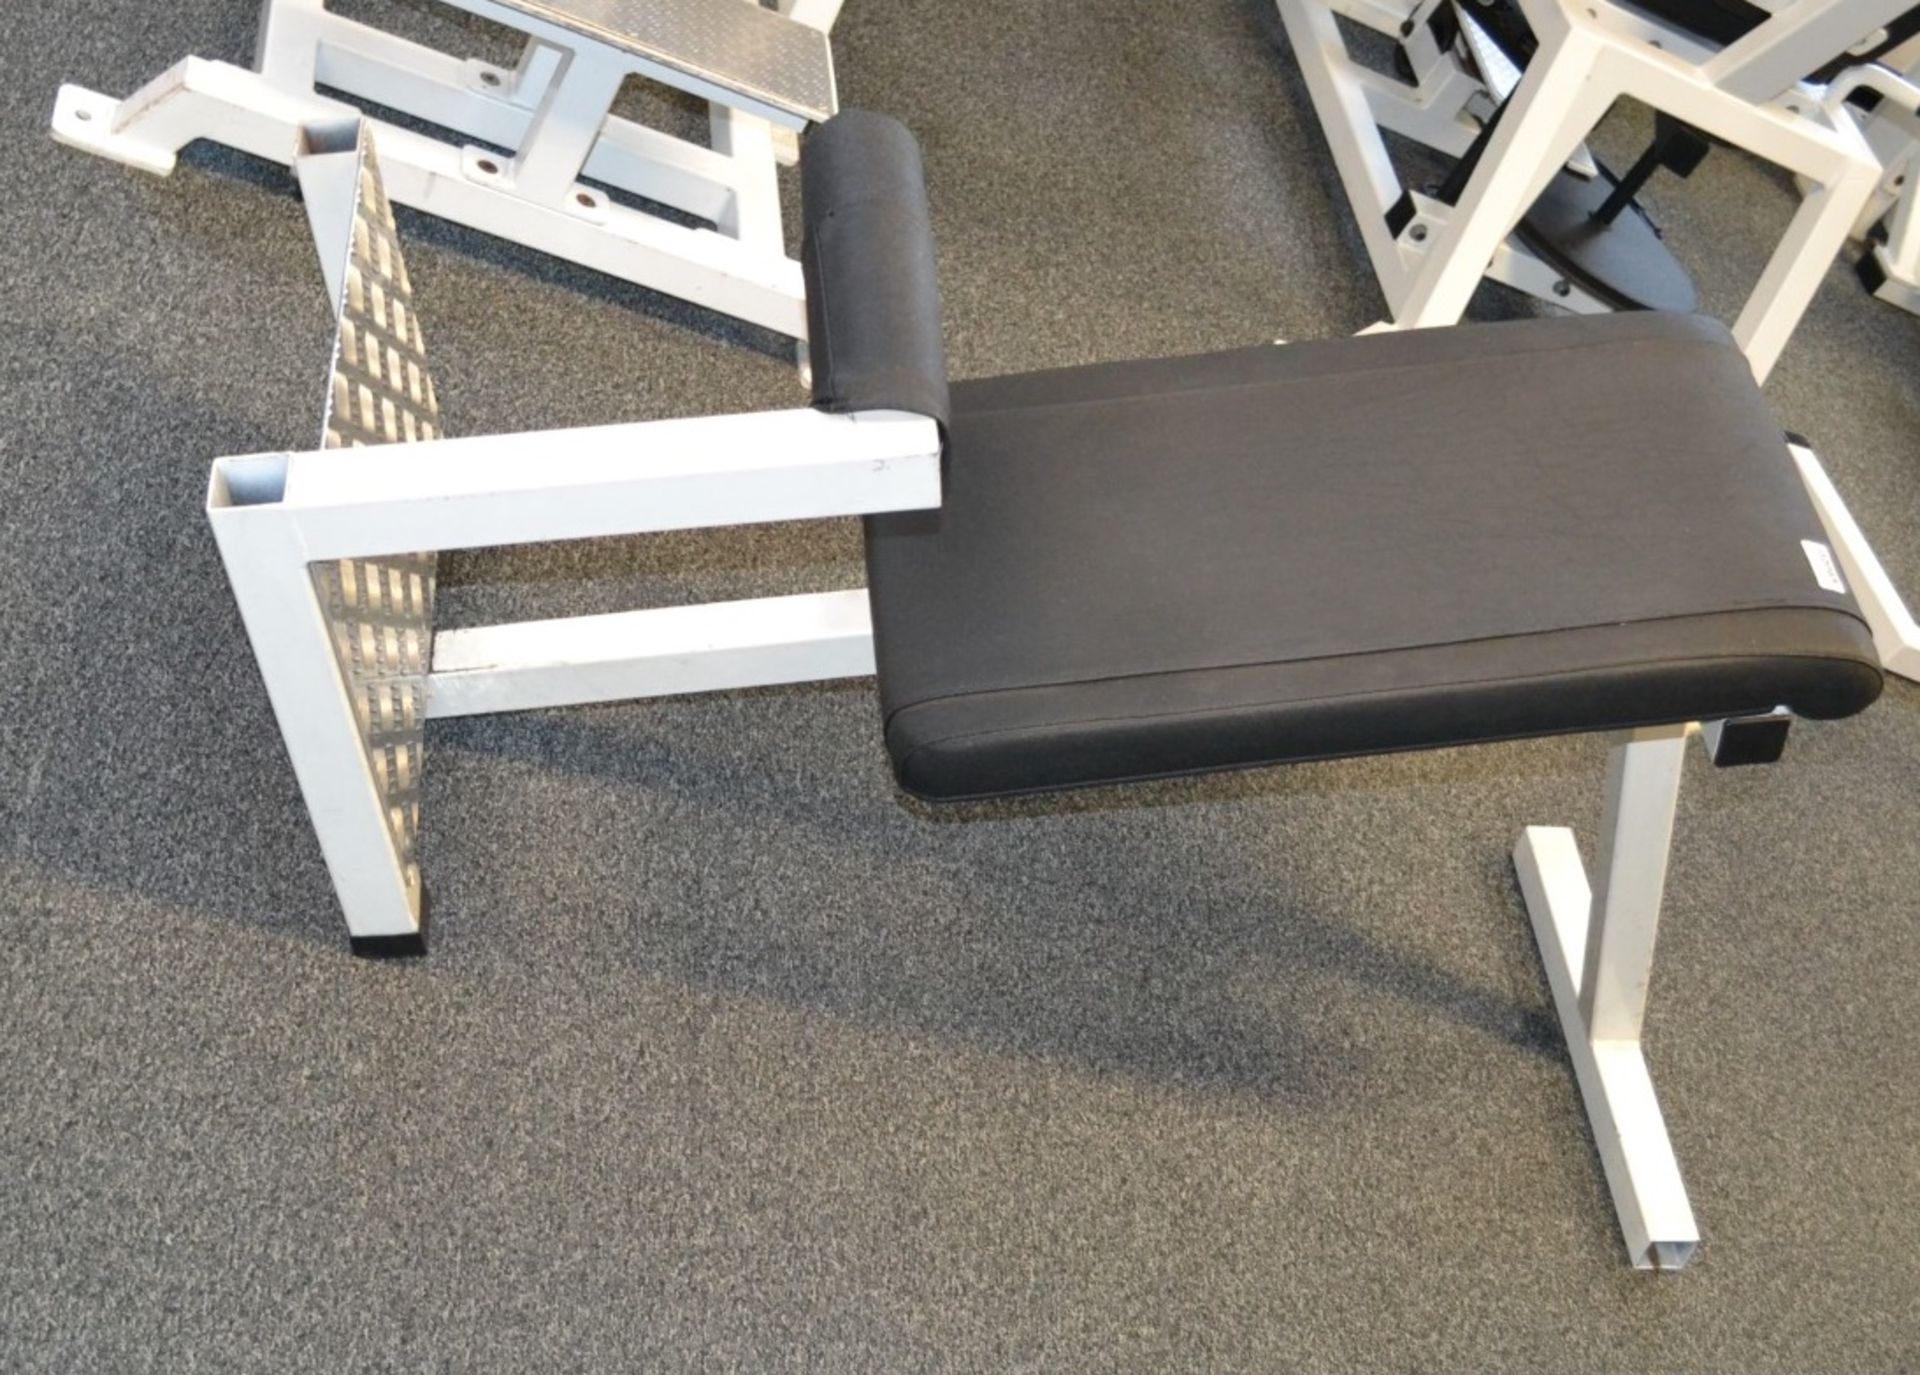 1 x Dr.Wolff Lateral 315 Fitness Bench - Dimensions: L145 x H55 x W45 - Ref: J2065/1FG - CL356 - - Image 2 of 2